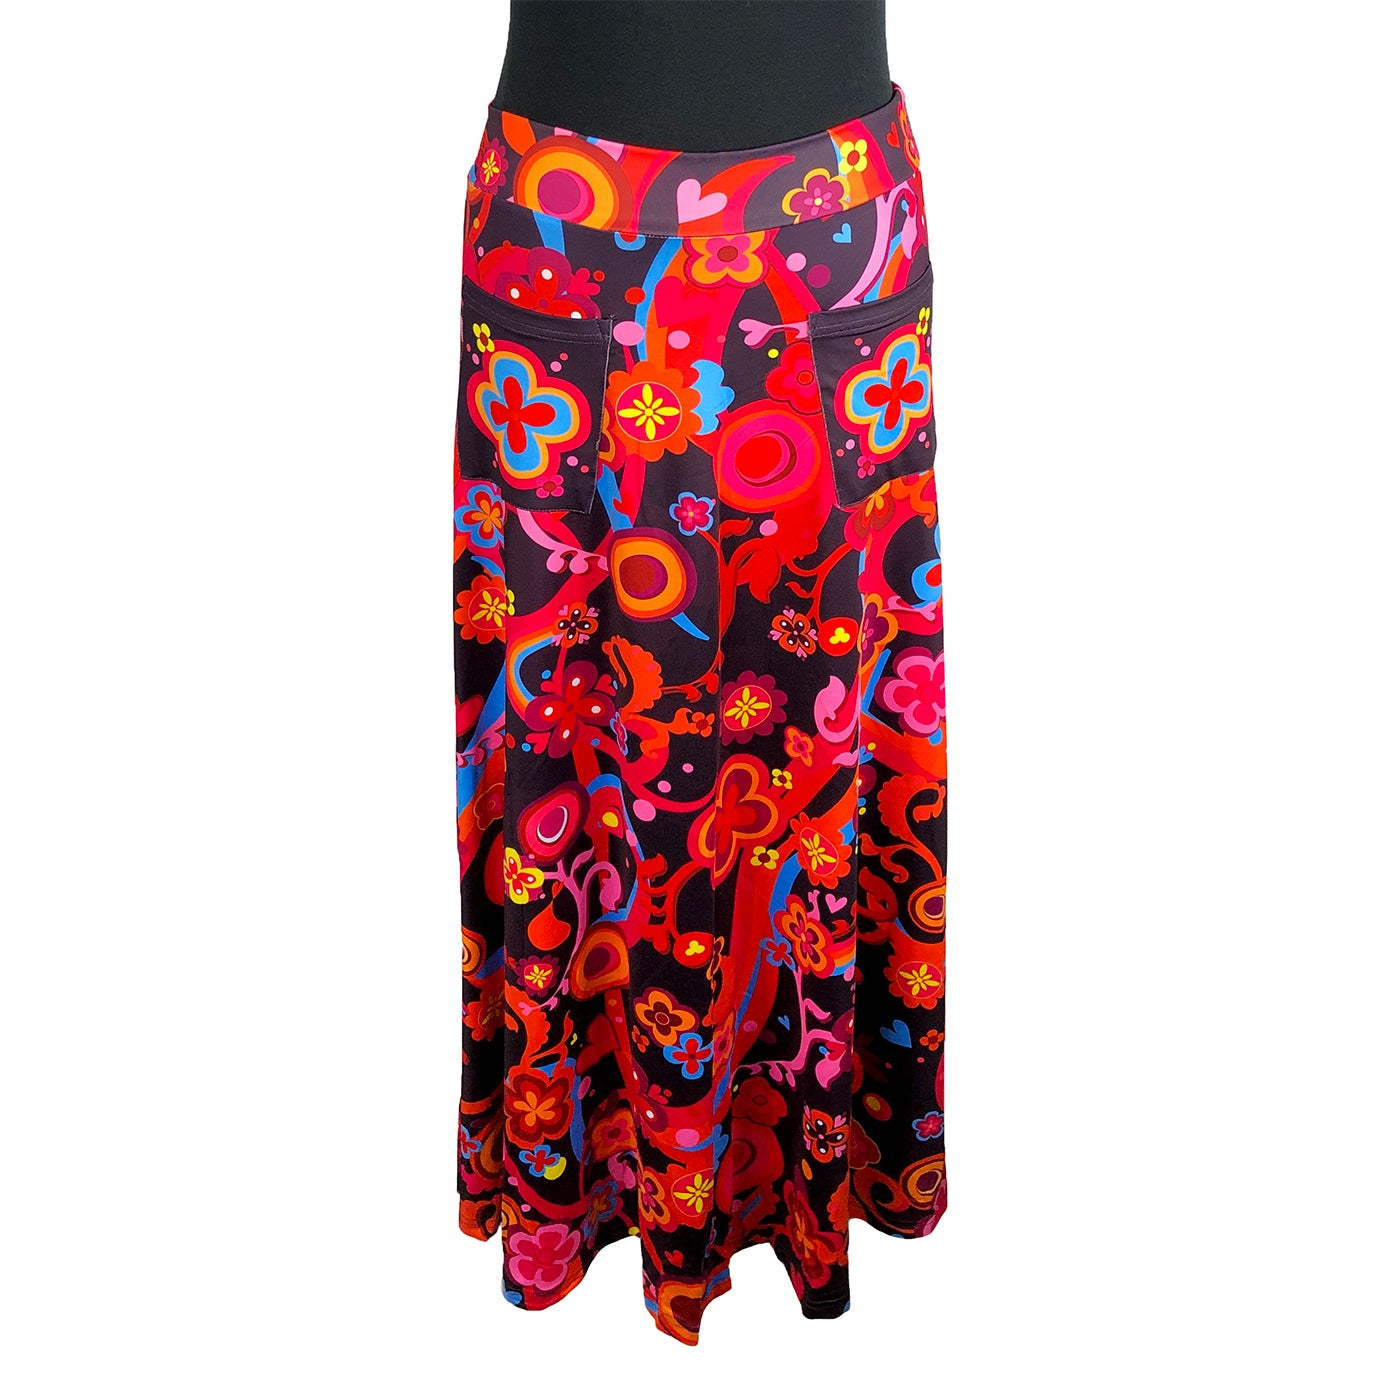 Groovy Maxi Skirt by RainbowsAndFairies.com.au (Flower Power - Psychedelic - Woodstock - Skirt With Pockets - Boho - Mod Retro - Vintage Inspired) - SKU: CL_MAXIS_GROOV_ORG - Pic-01